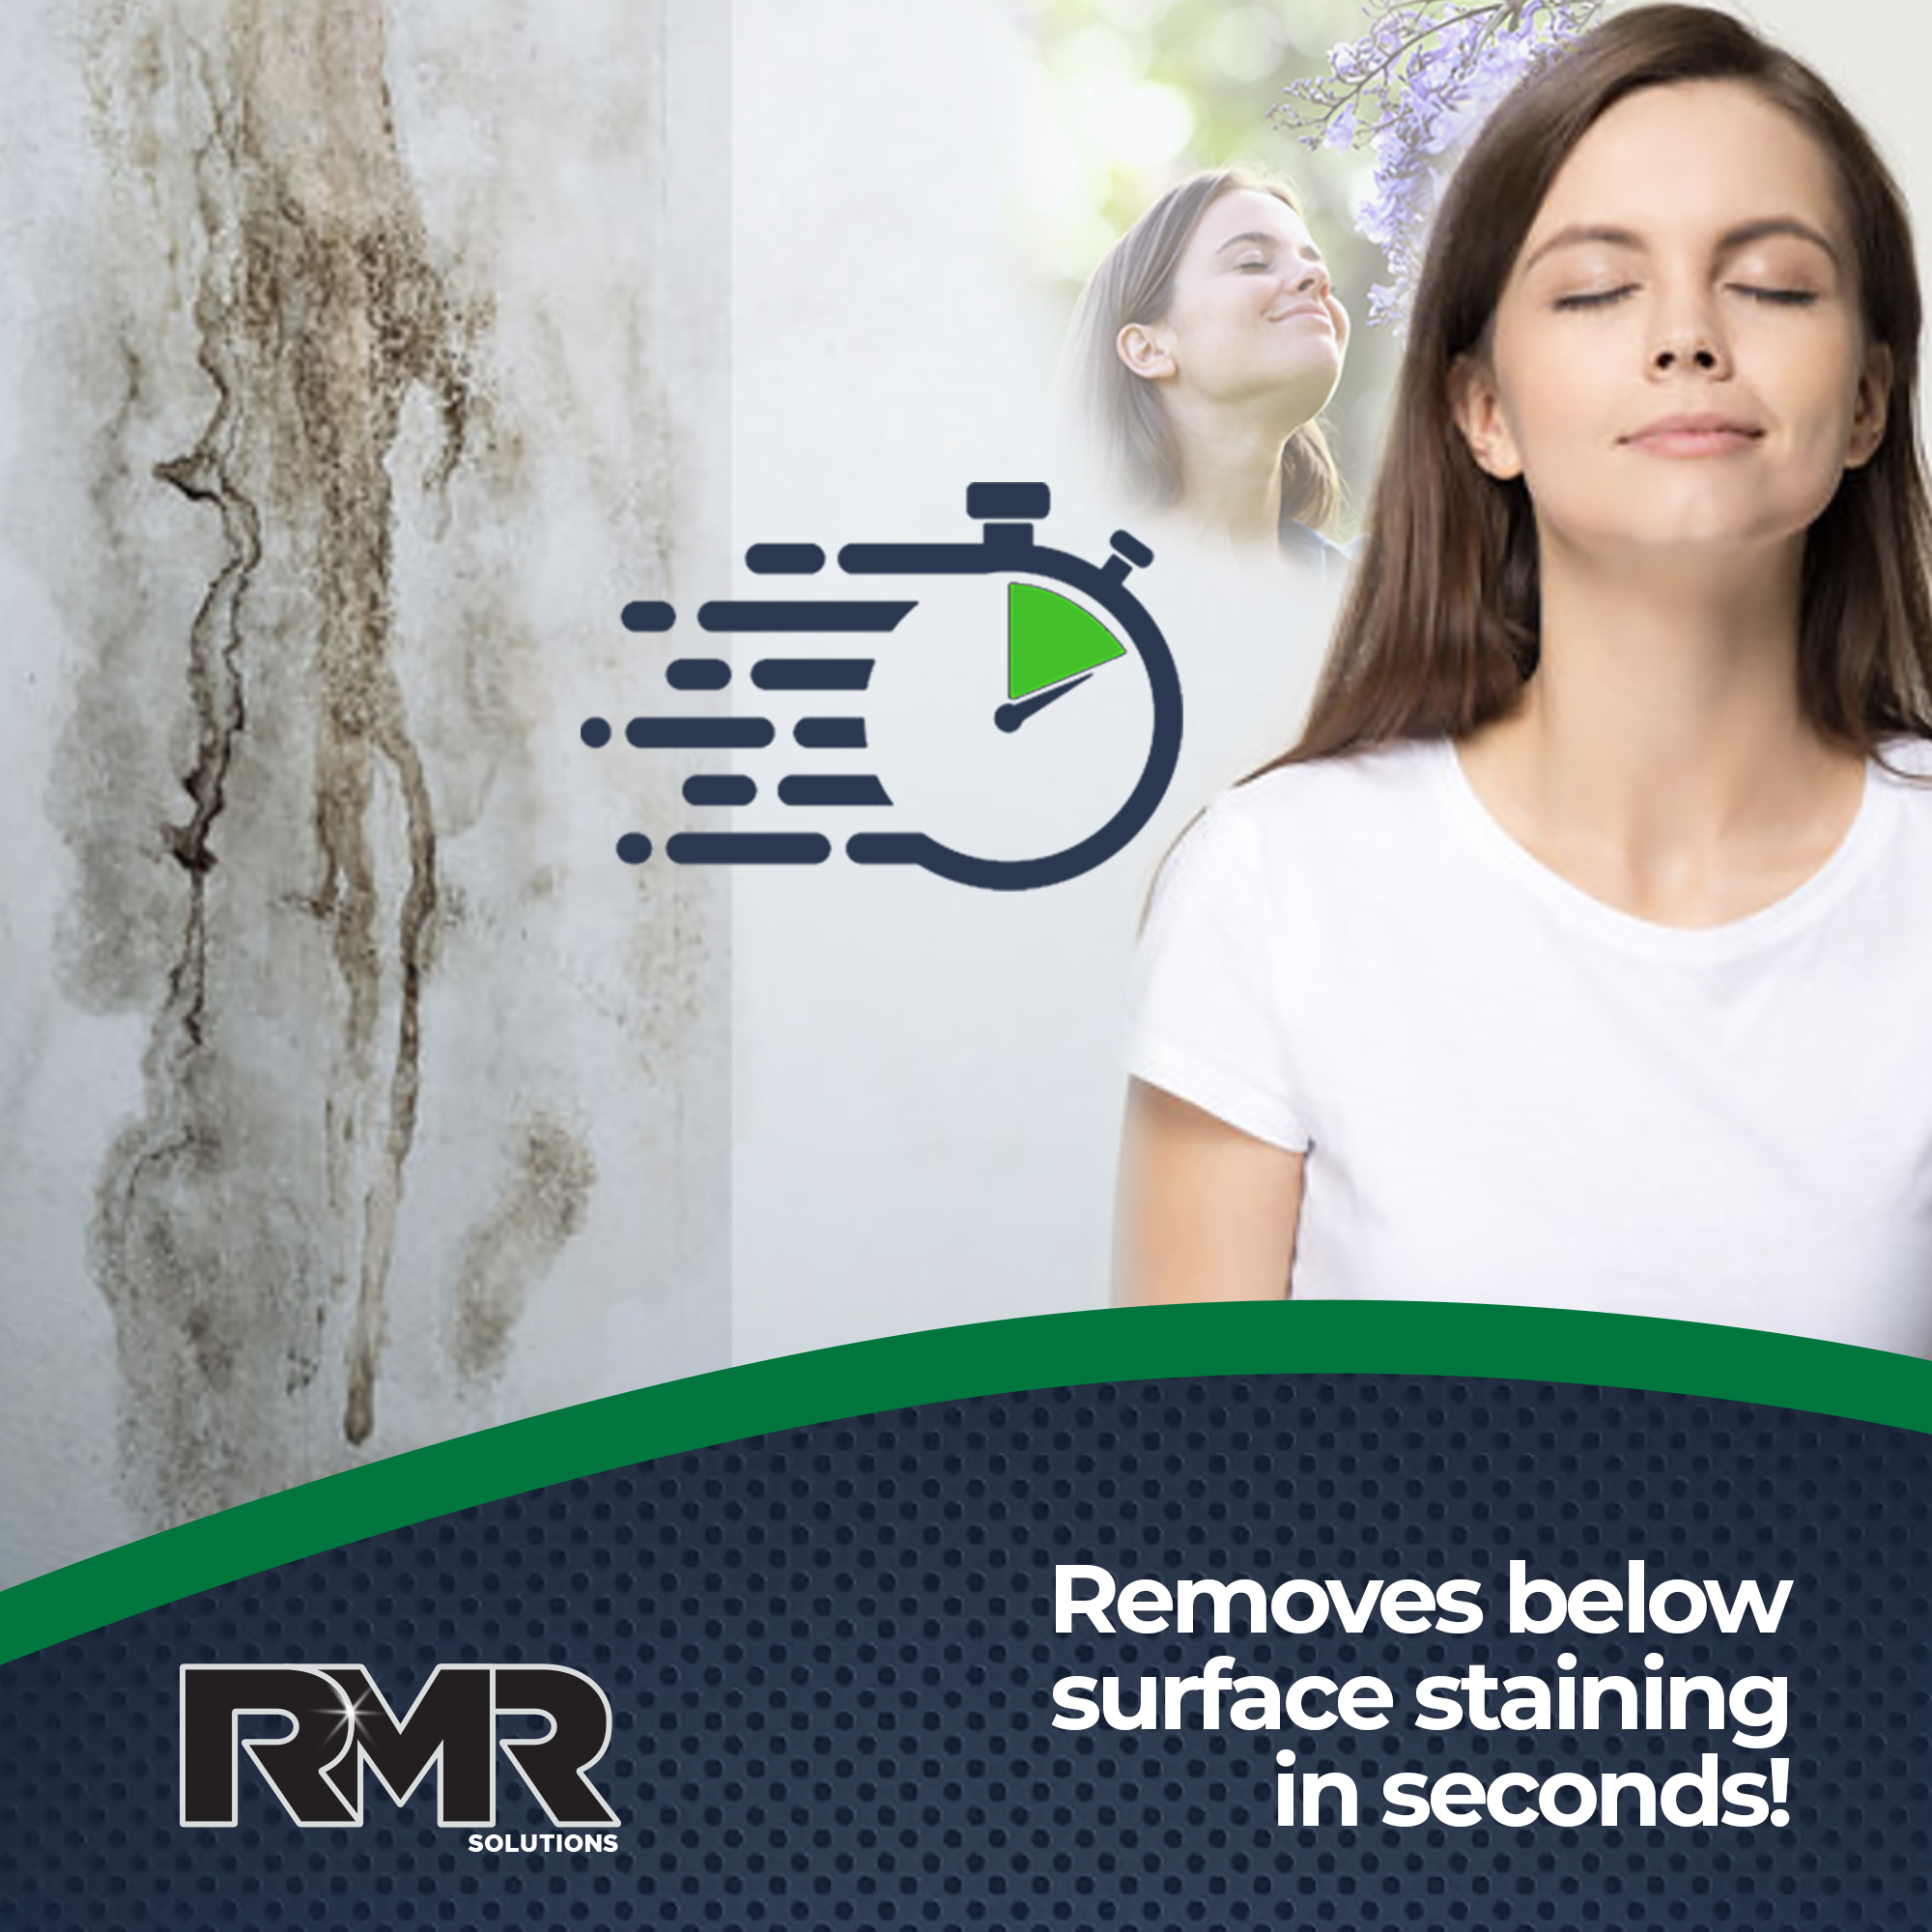 RMR-86 Instant Mold and Mildew Stain Remover, 32 Fl Oz - image 3 of 8